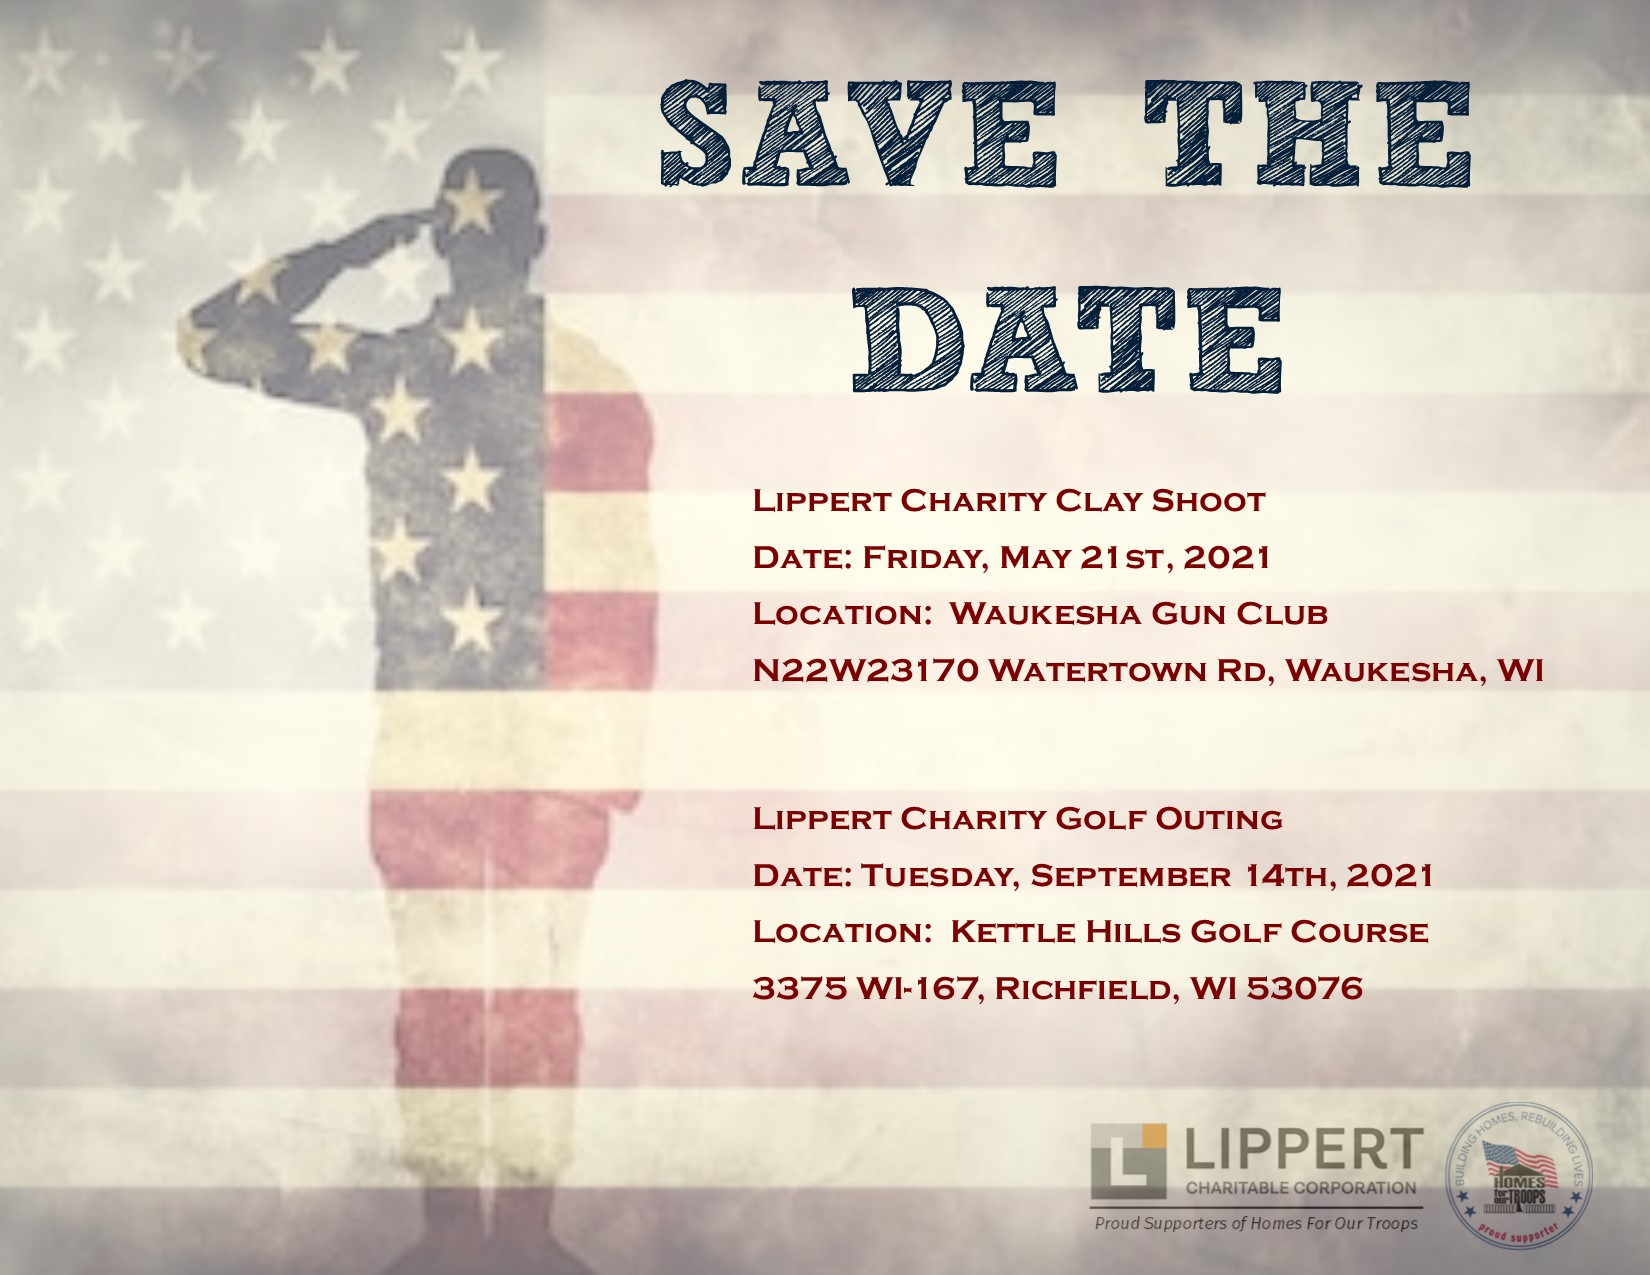 Lippert Charitable Corporation save the date